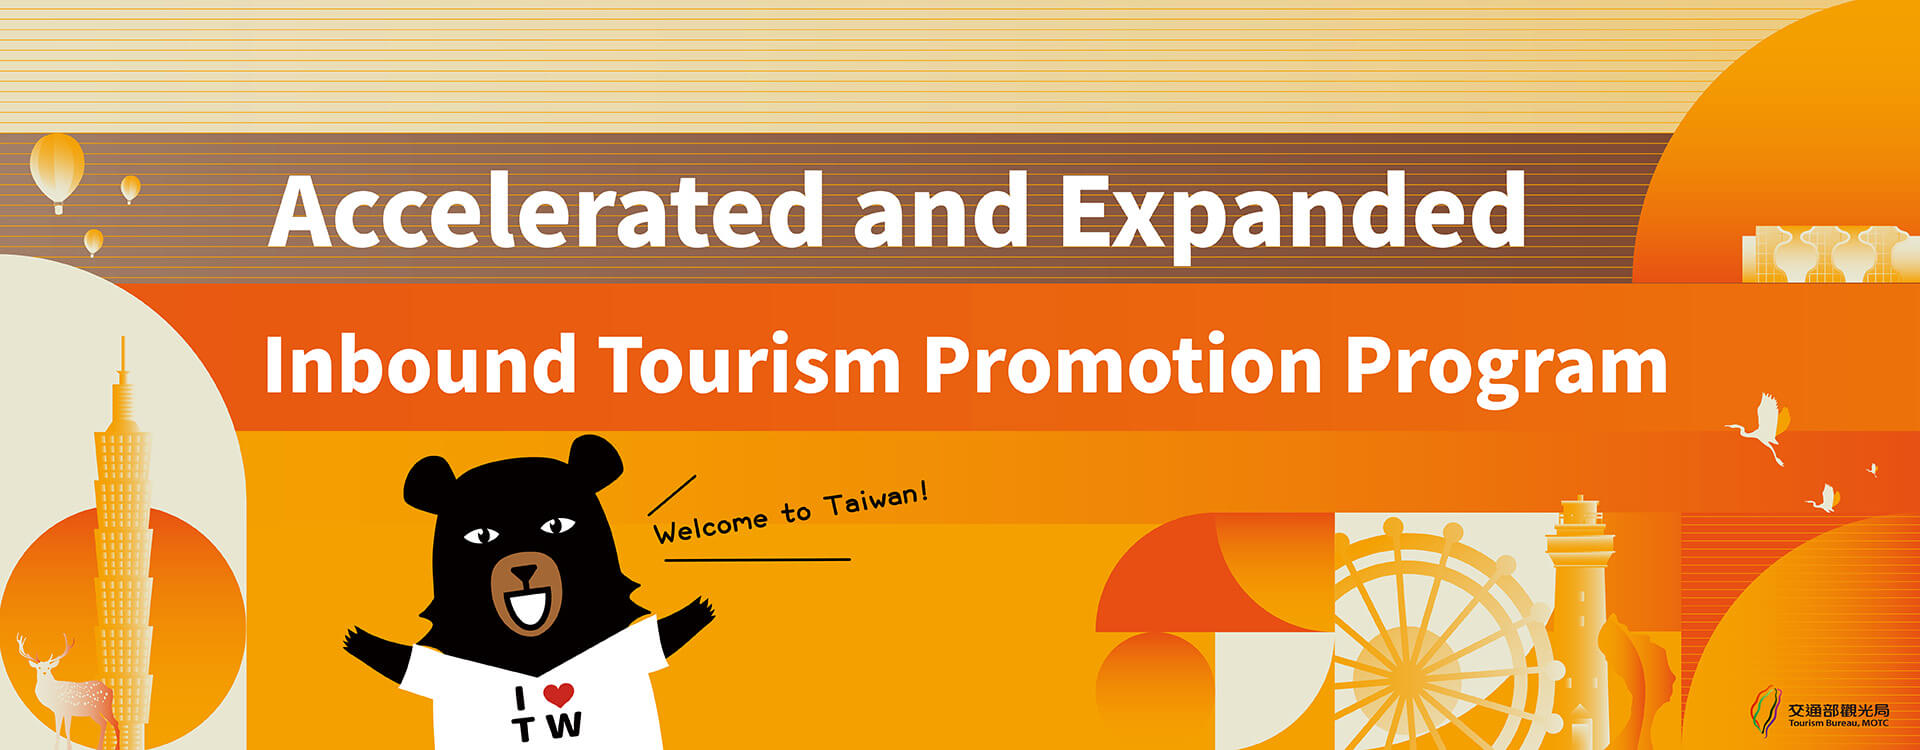 Accelerated and Expanded Inbound Tourism Promotion Program